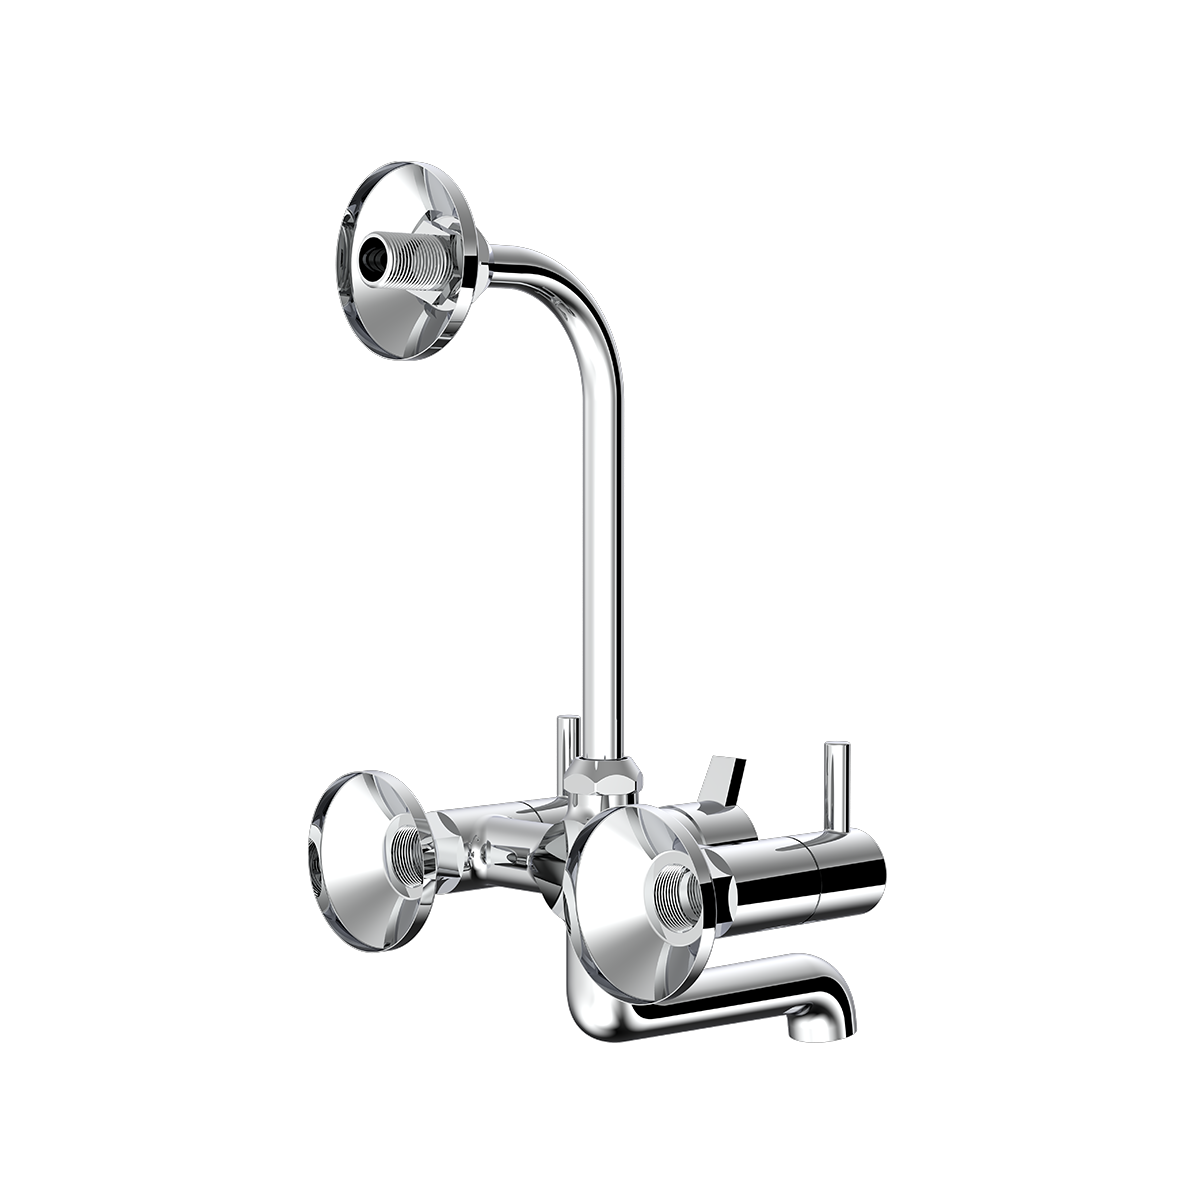 Wall Mixer With Provision Of Overhead Shower With